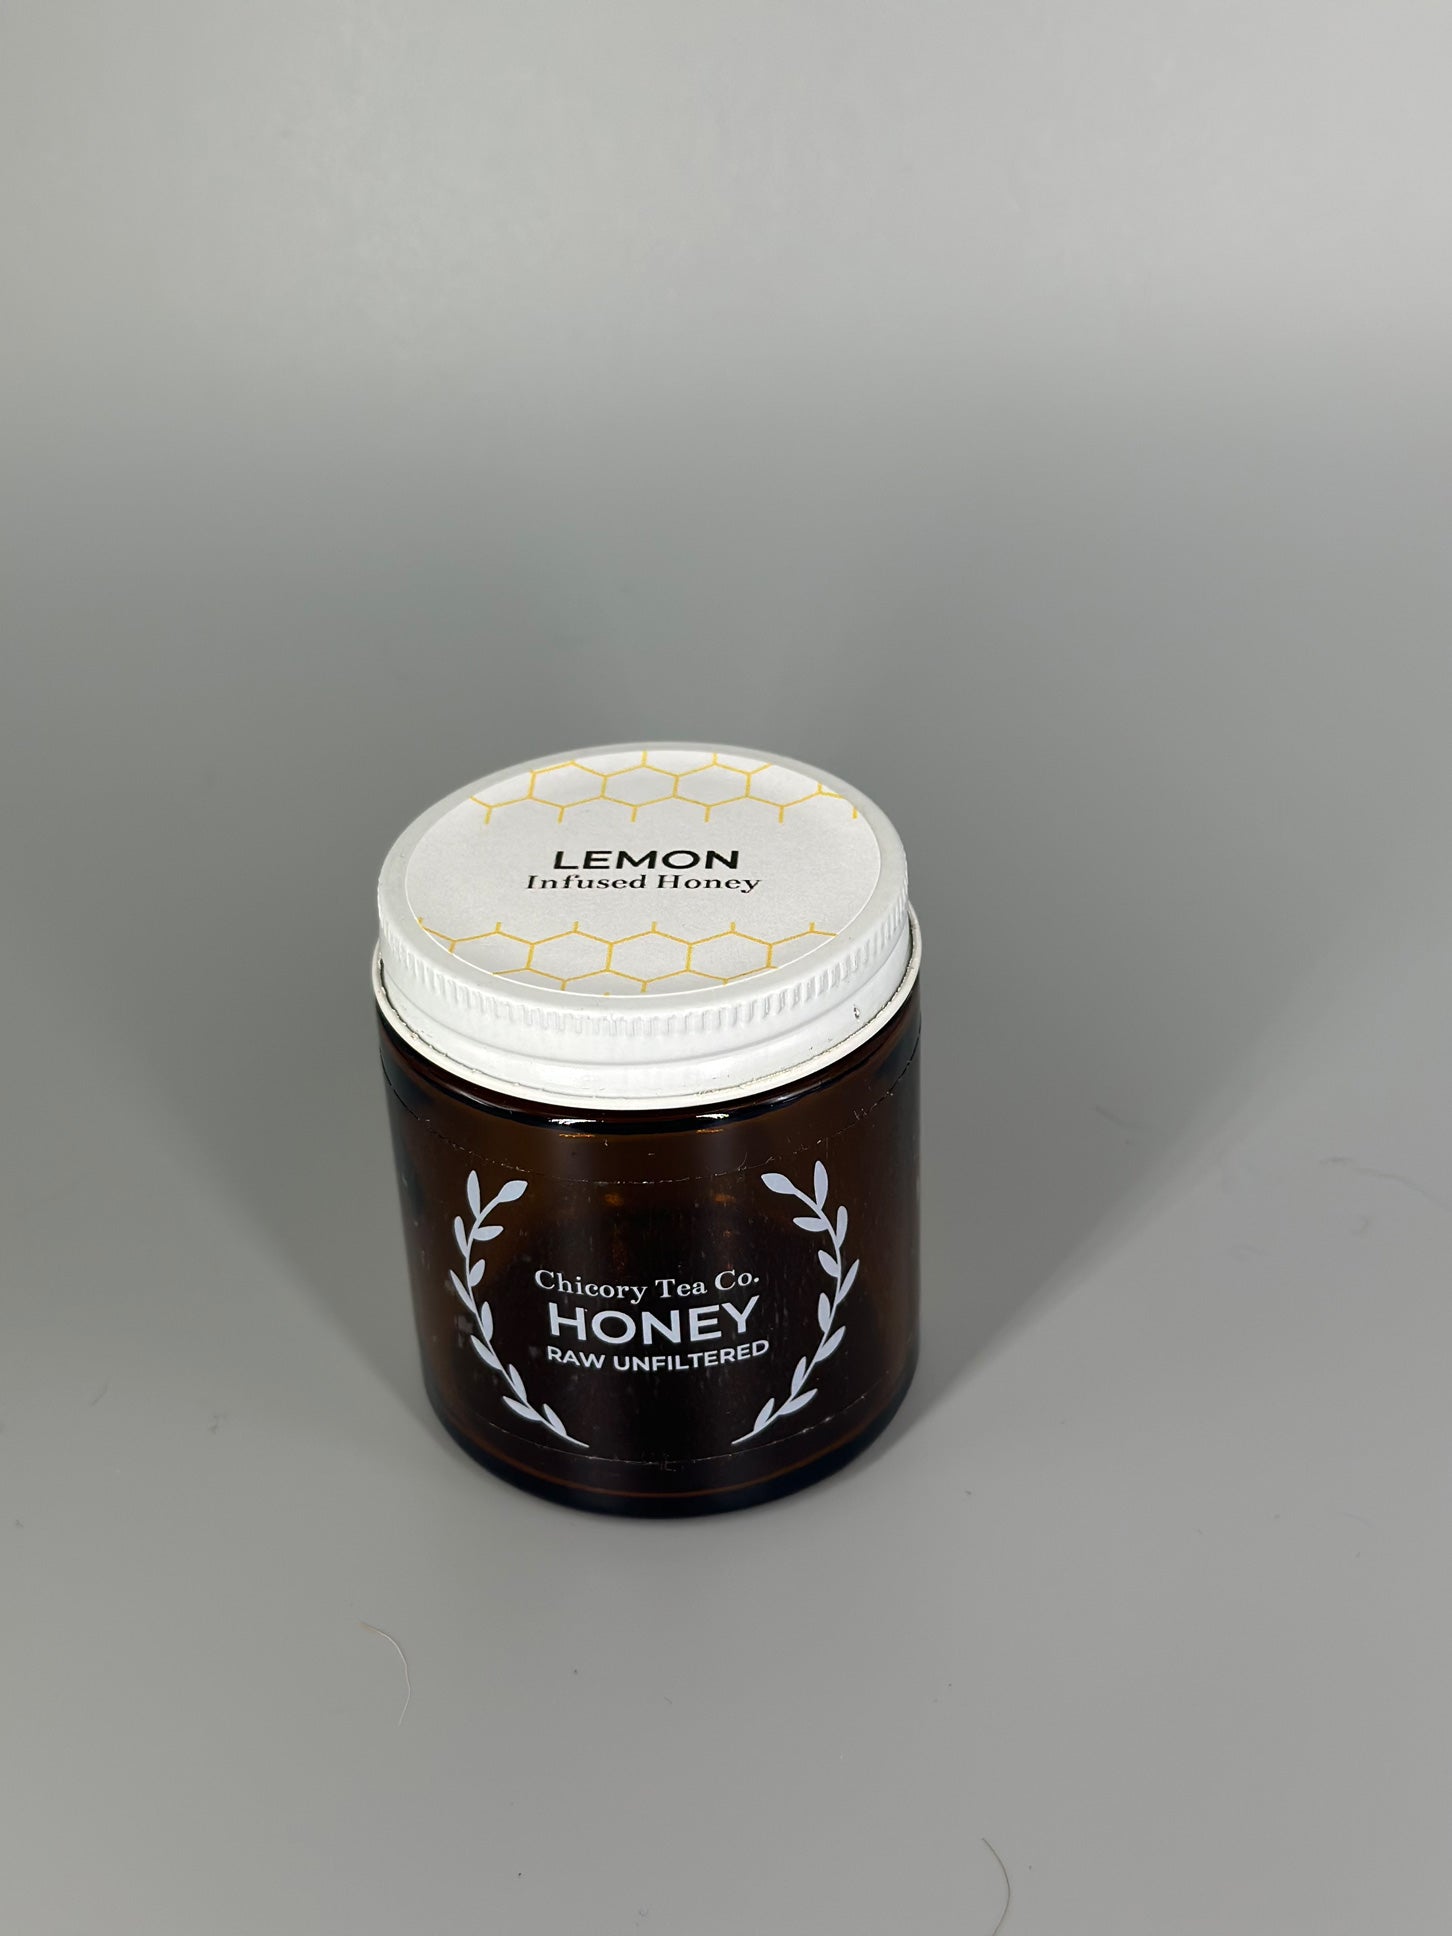 Chicory Tea Co.'s Lemon Honey in the jar, from the front